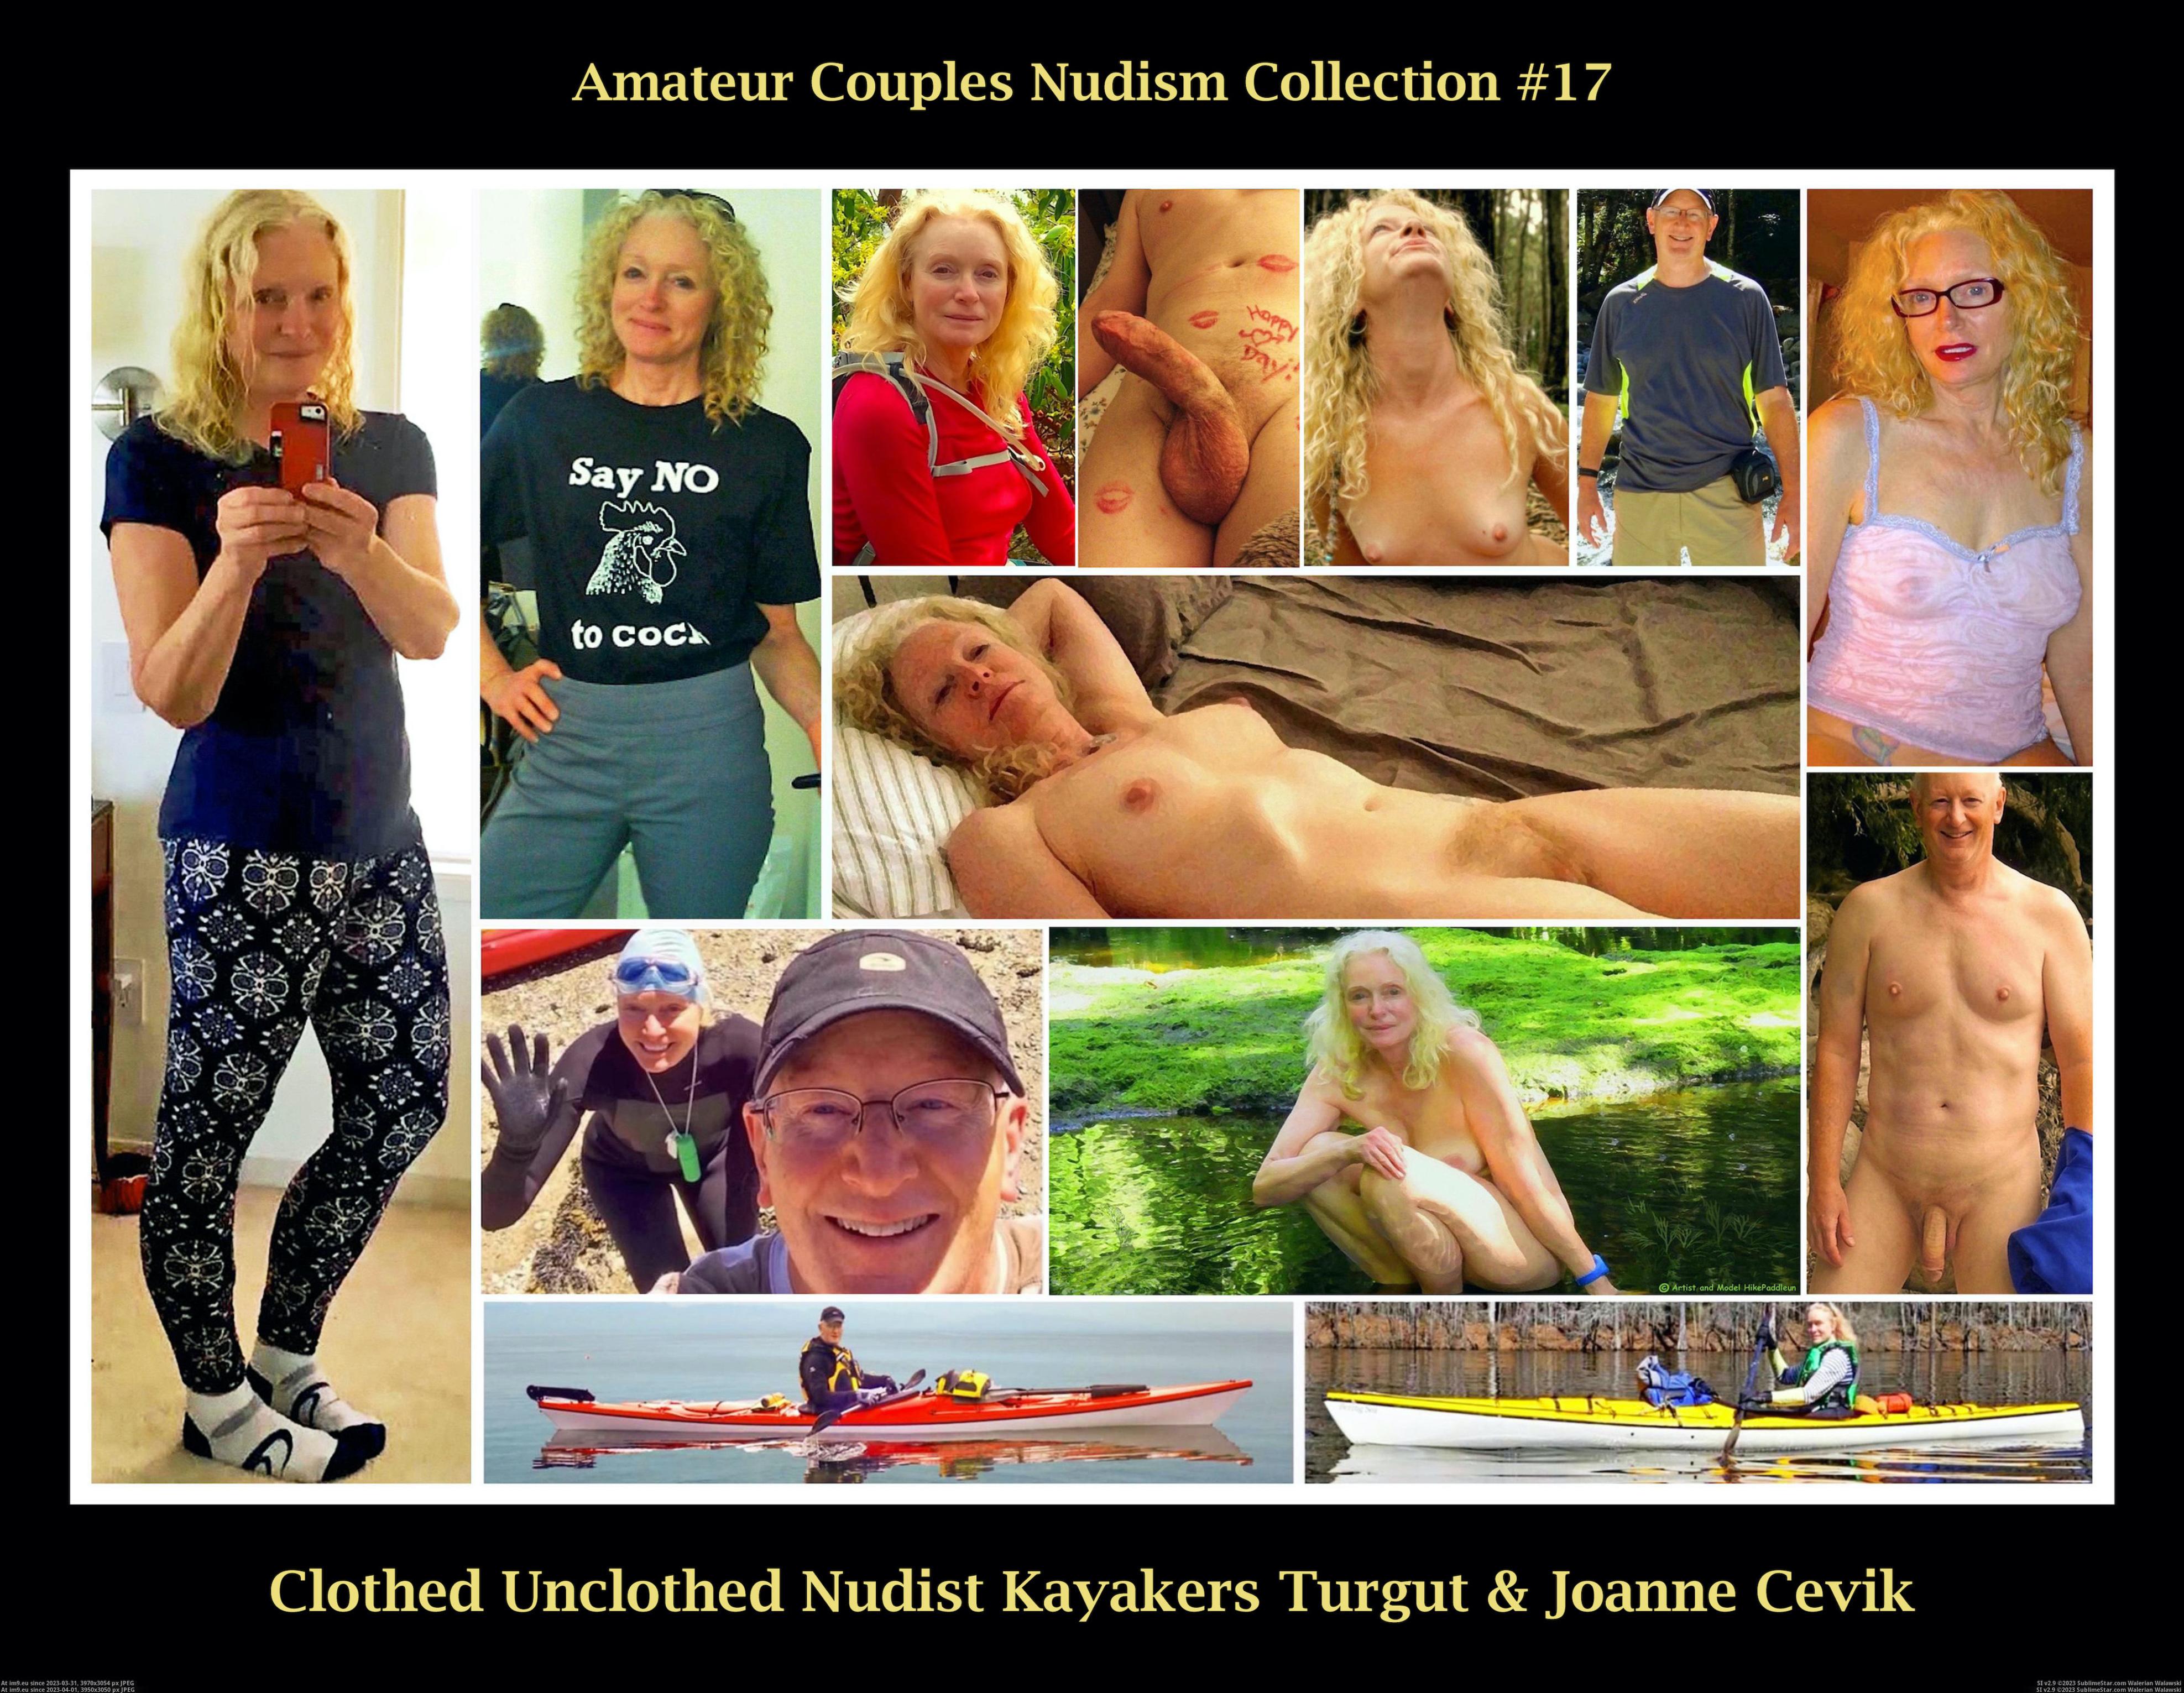 Clothed Unclothed Amateur Nanaimo Nudist Kayakers (in Instant Upload)